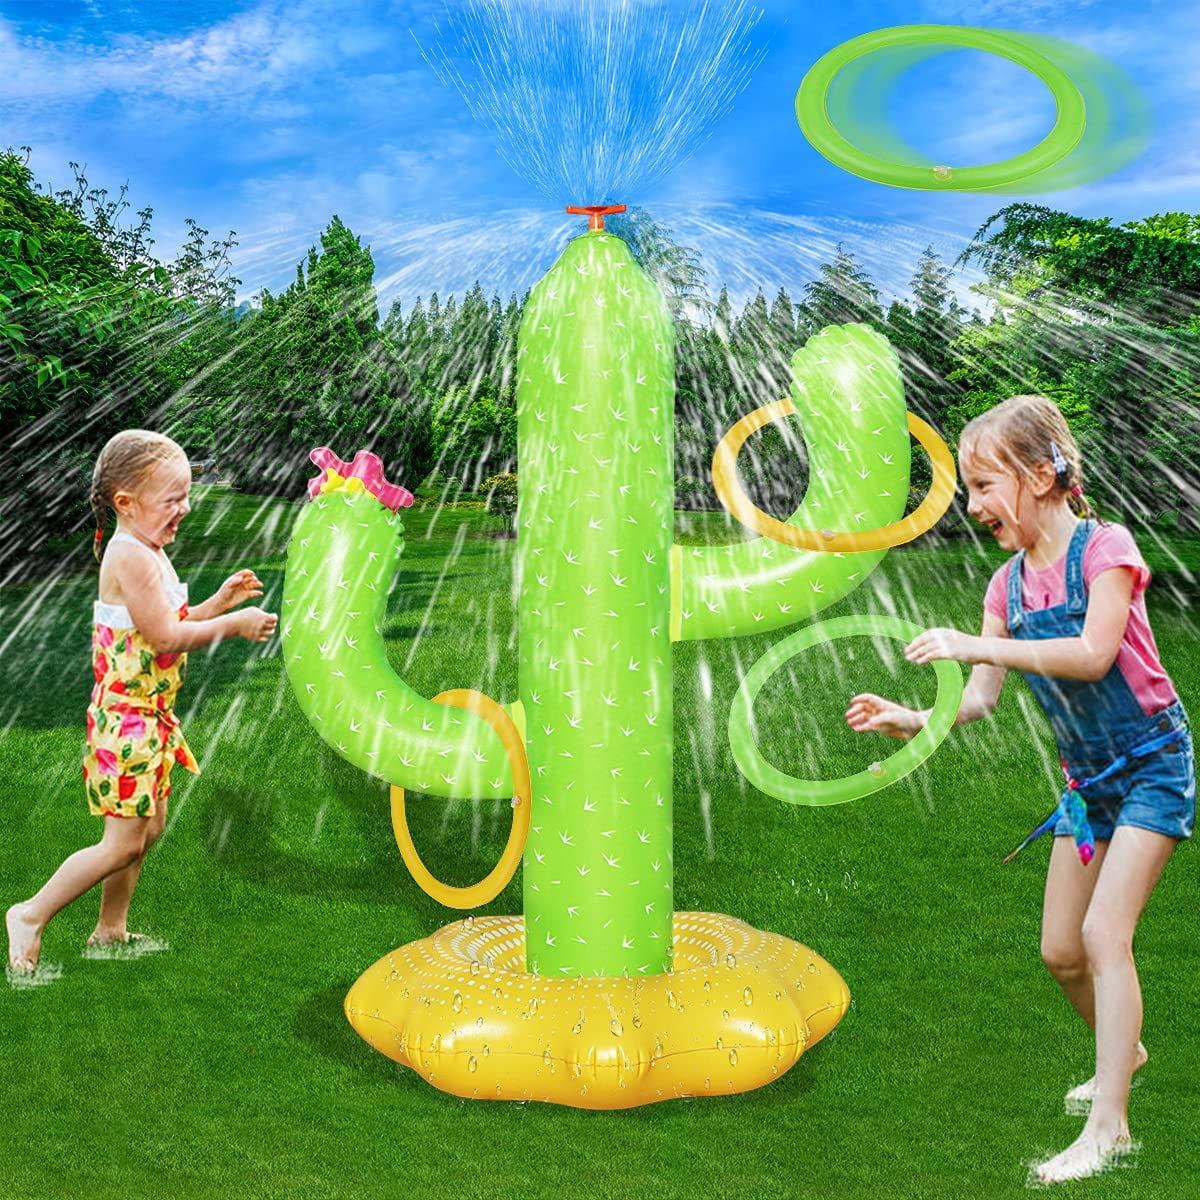 Cactus Sprinkler for Backyard Spray Rings, Outdoor for with Summer Years Game Water Ages Gifts Kids, and Water Inflatable Toy 6 Sprinkler 5 4 4 Cactus Girls, 3 Children for U Fun Toys Boys